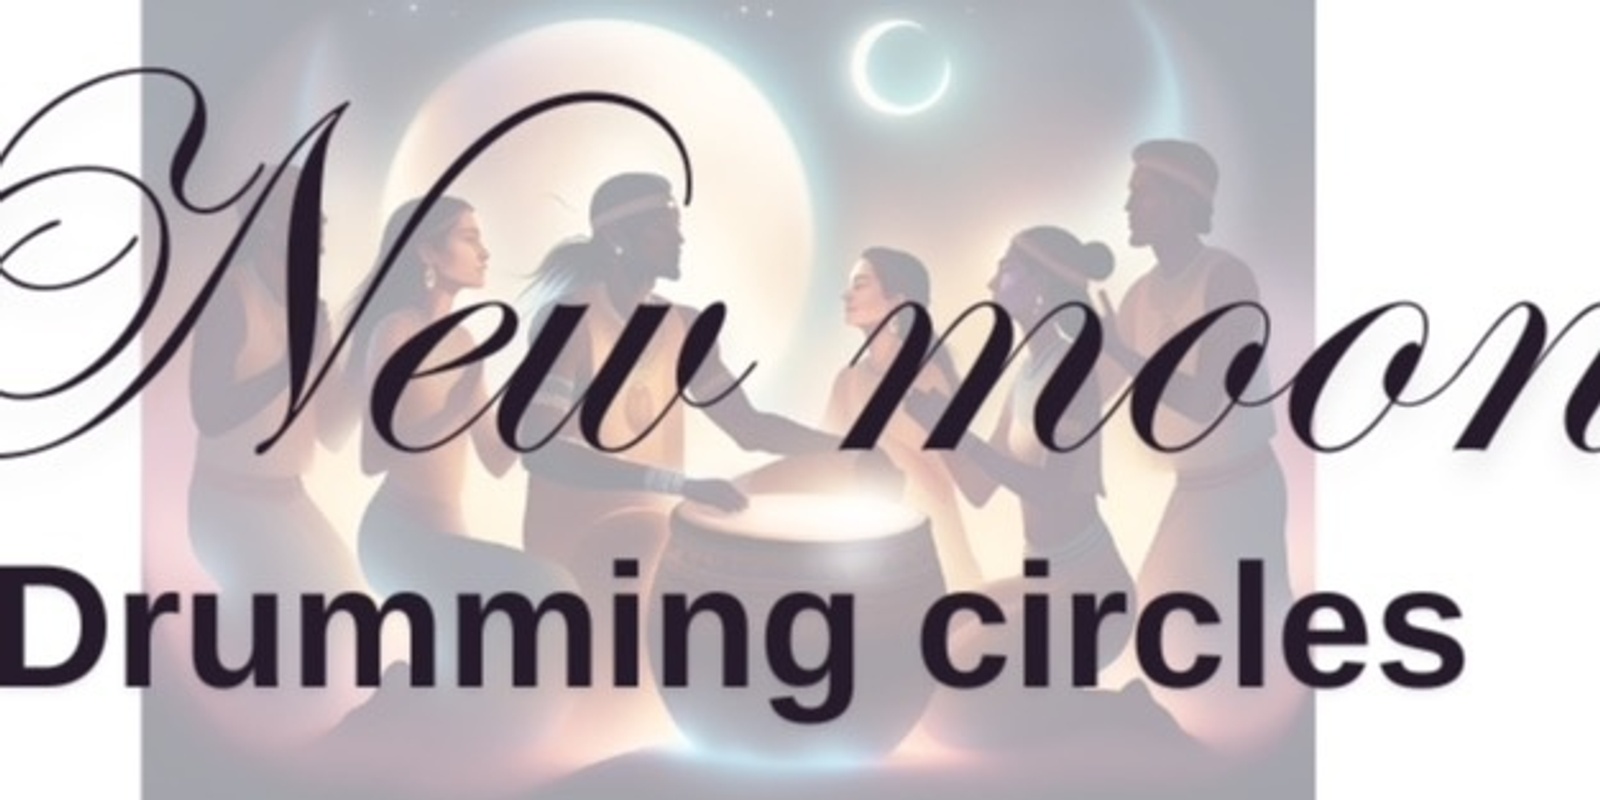 Banner image for New Moon Drumming circle